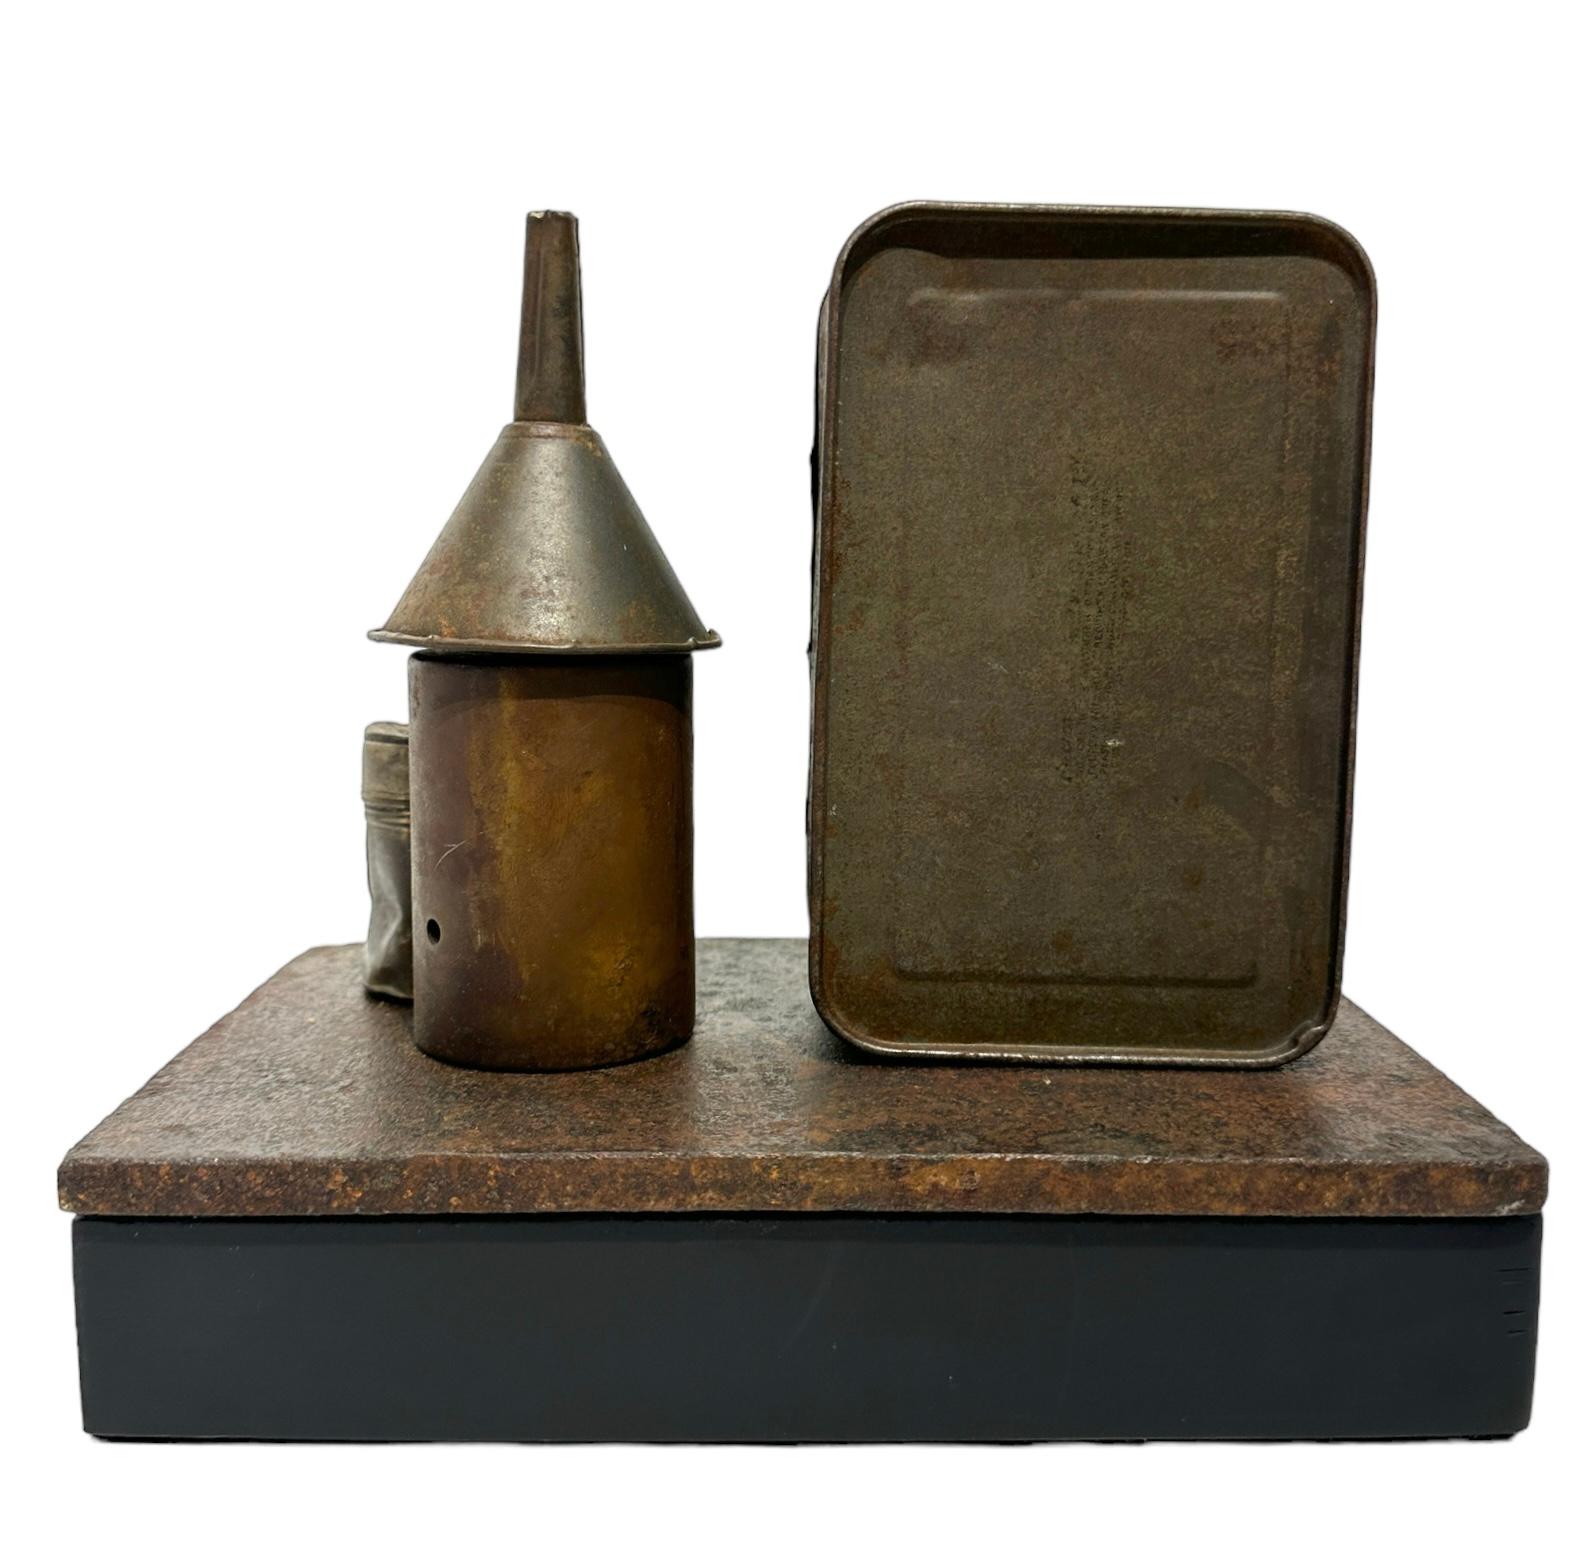 Welded Found and Salvaged Steel Industrial Objects on Wooden Base For Sale